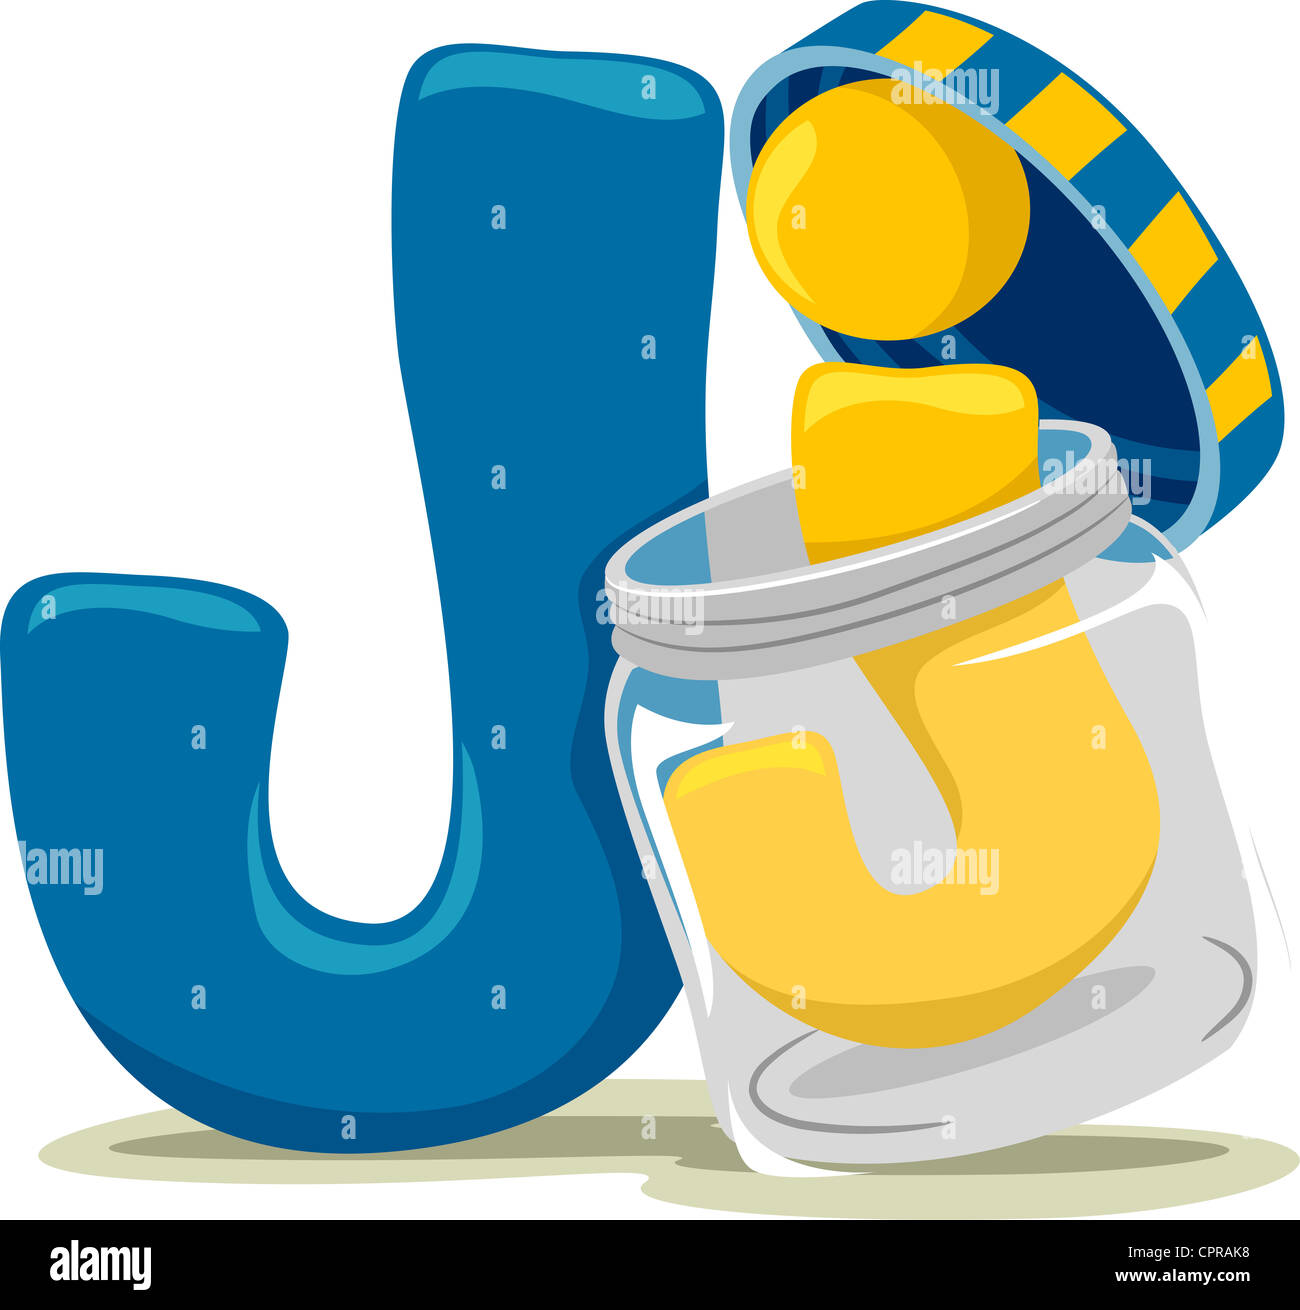 Illustration Featuring the Letter J Stock Photo